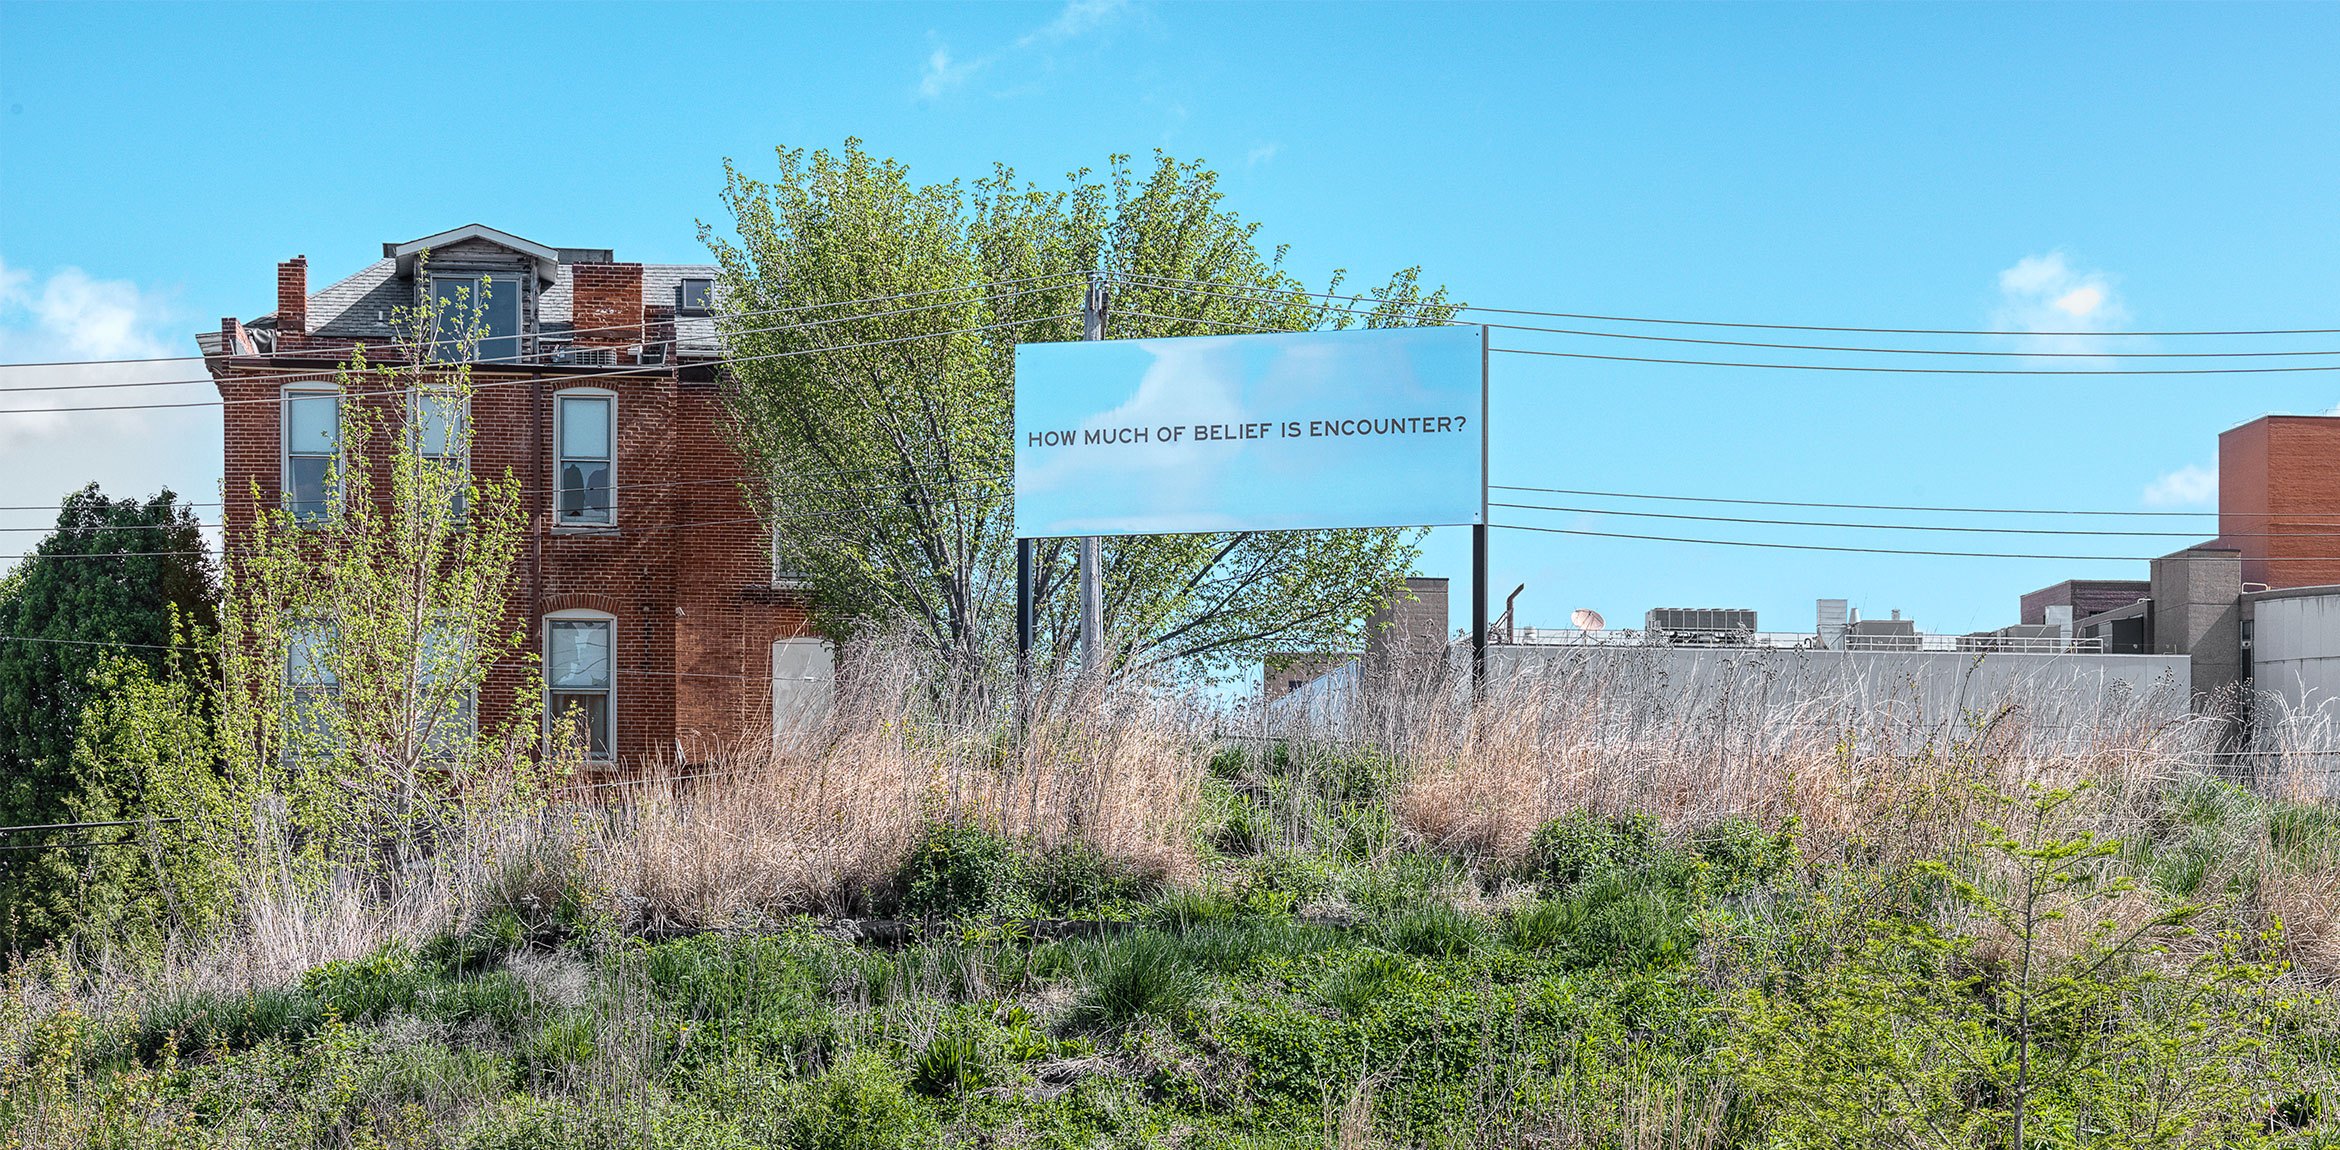 A mirrored billboard work with text by Chloë Bass installed outdoors in Park-Like